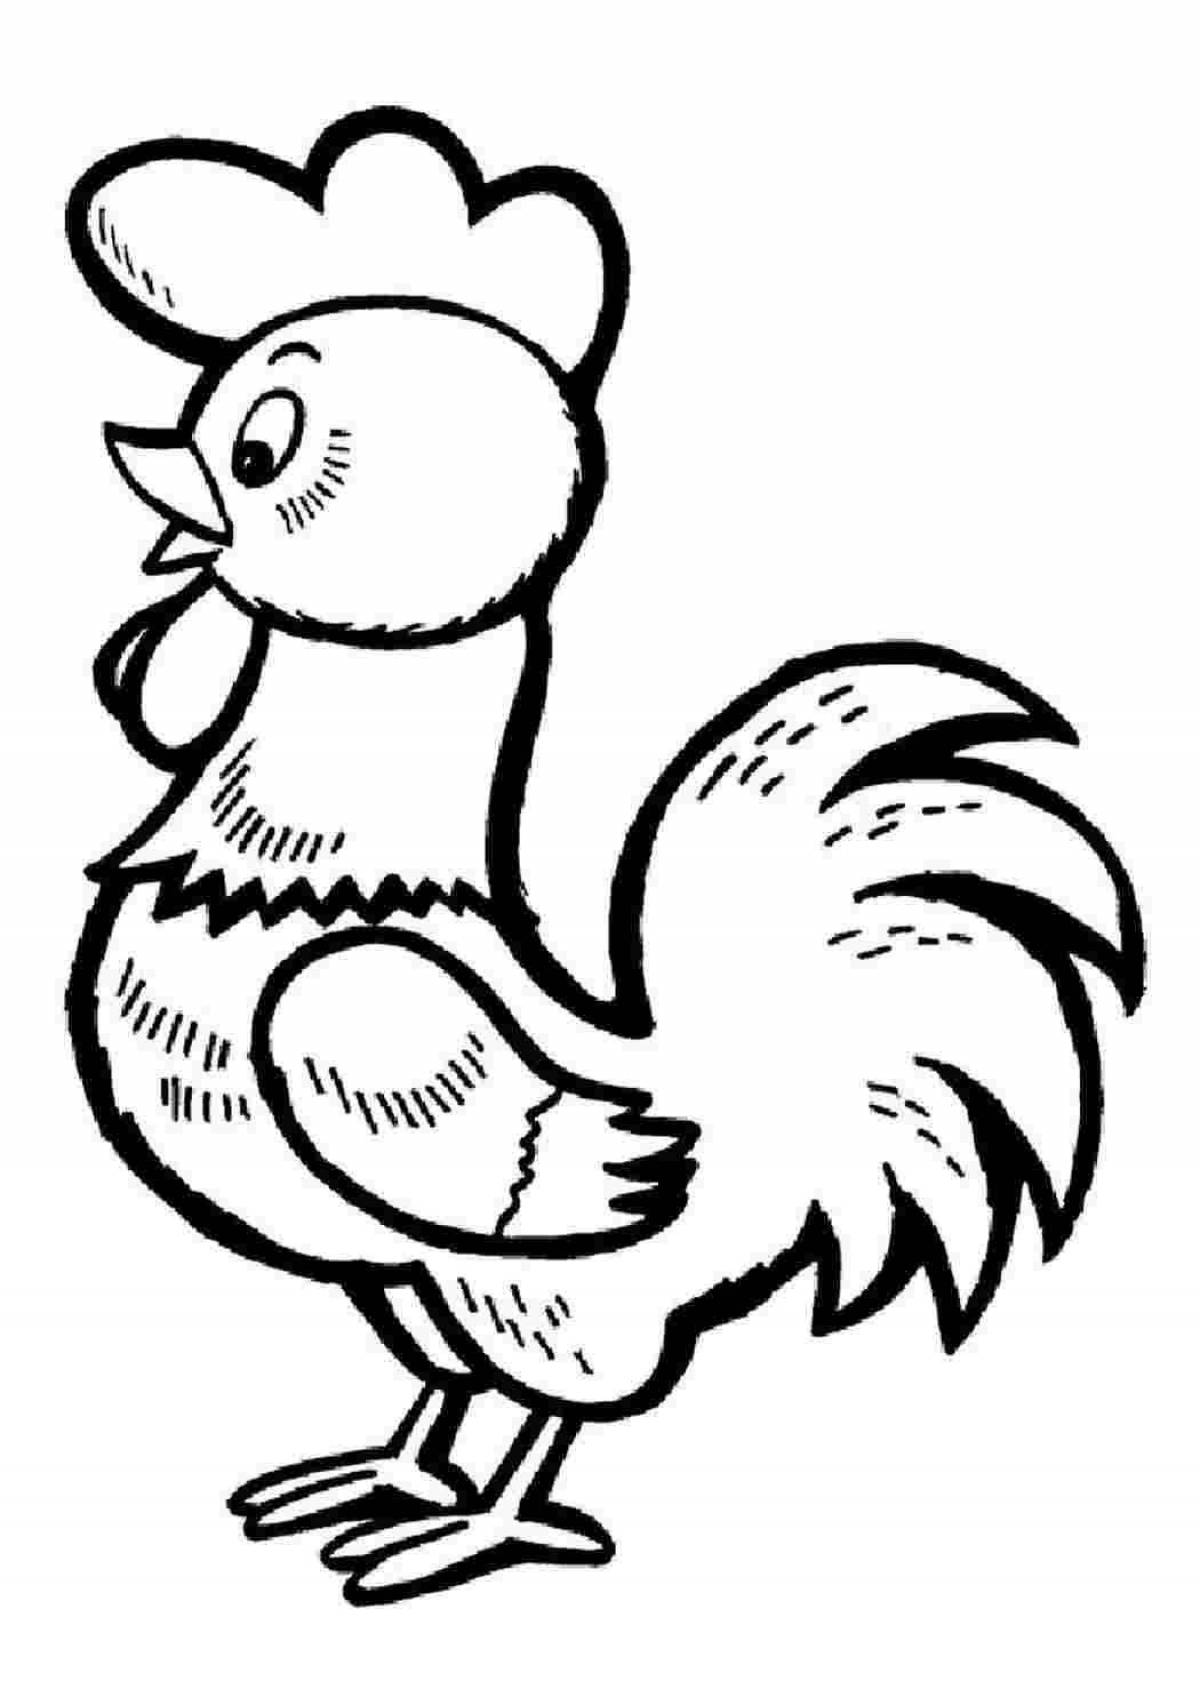 Creative rooster coloring for kids